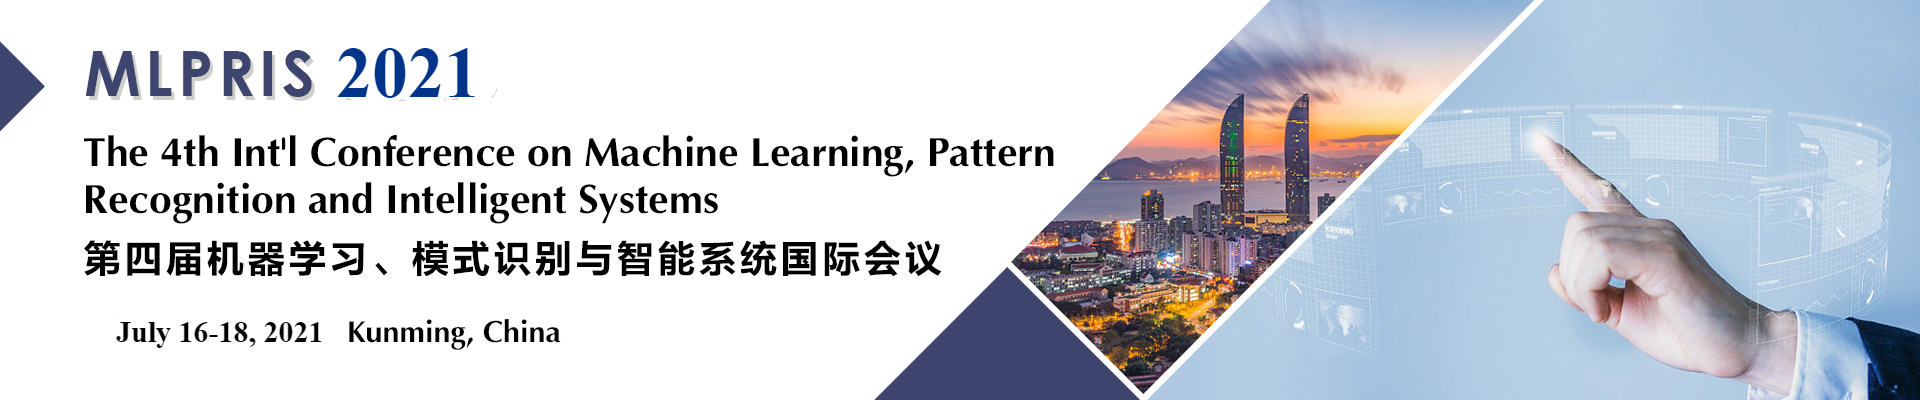 The 4th Int'l Conference on Machine Learning, Pattern Recognition and Intelligent Systems (MLPRIS 2021), Kunming, Yunnan, China